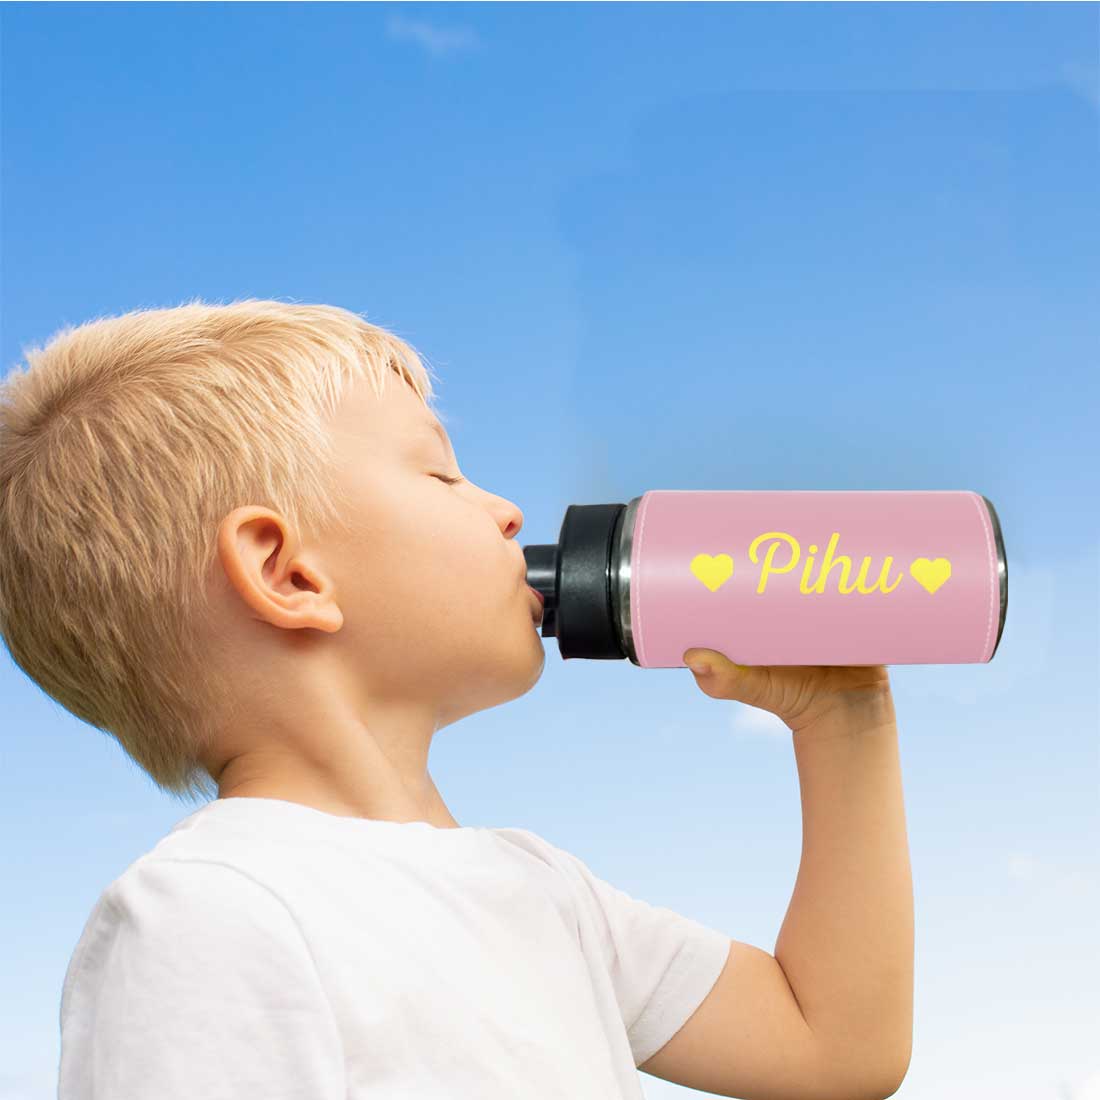 Customized Water Bottles With Names Stainless Steel PU Leather Pink Sipper Bottles For Girls